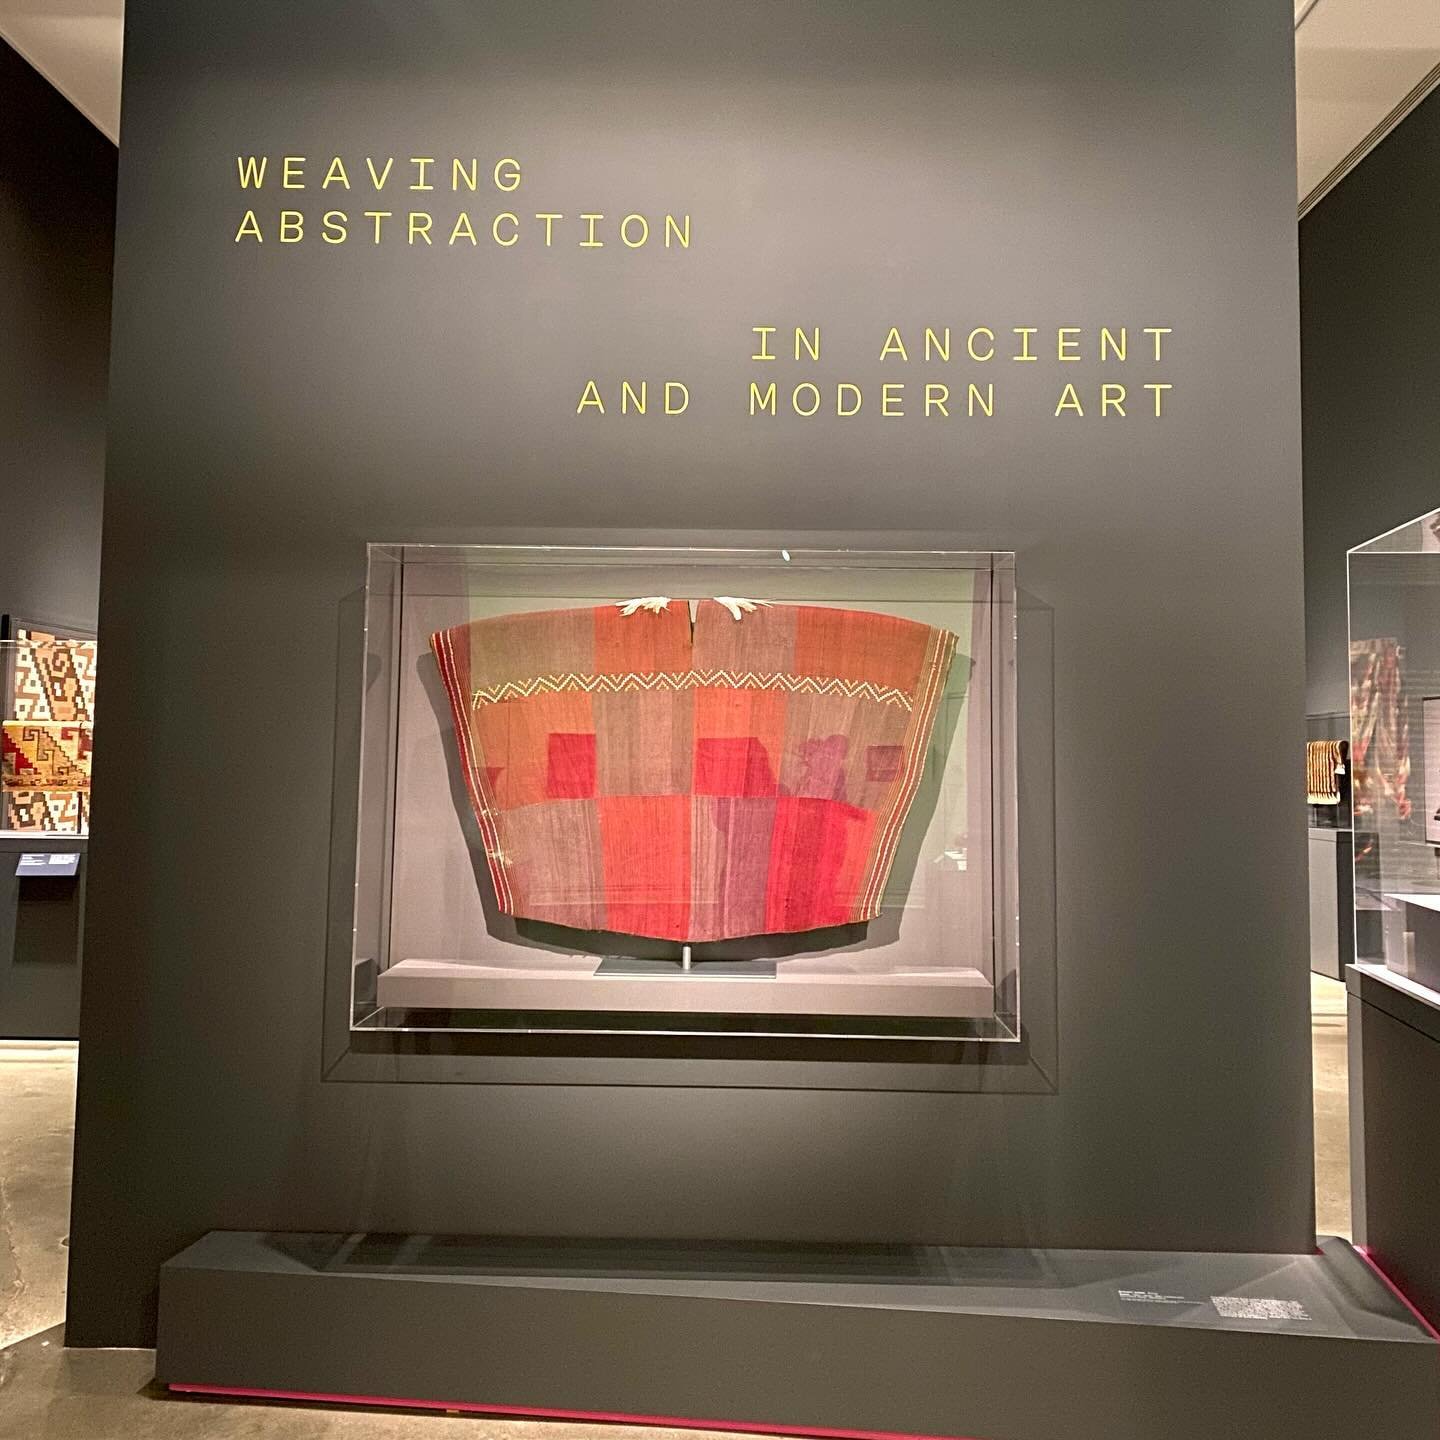 Weaving Abstraction at the Met, excellent, intricate, fascinating visual language of pattern, variation, color and expression. #weavingabstraction